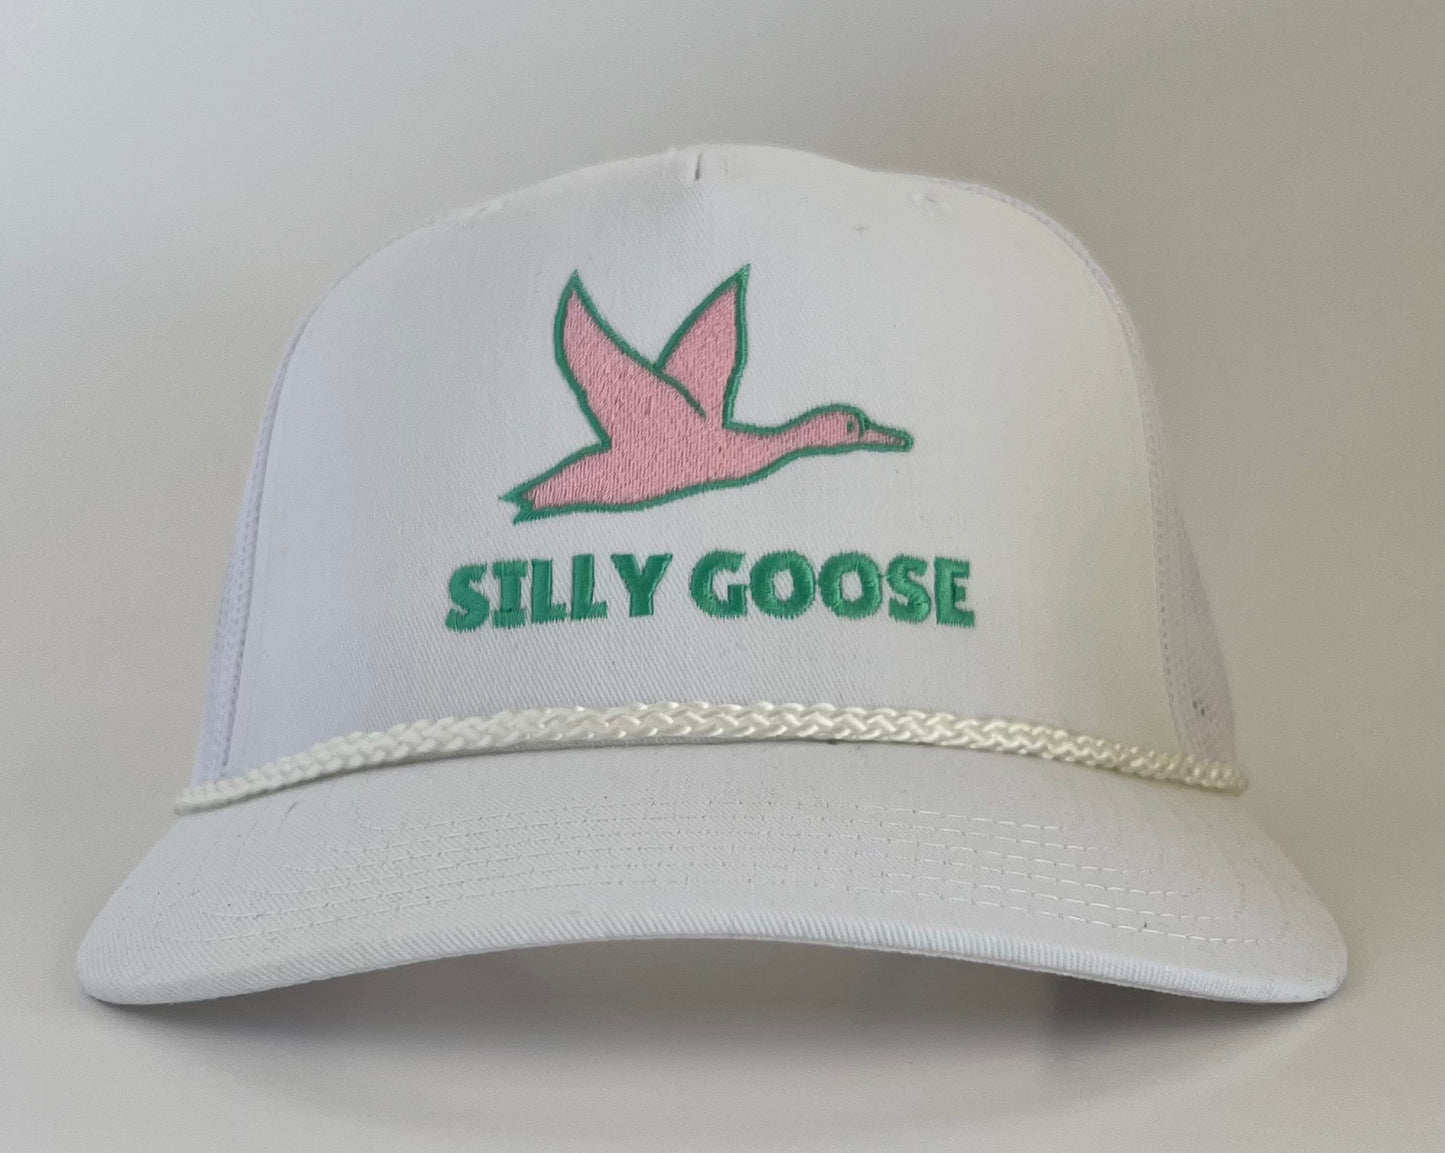 Silly Goose - White